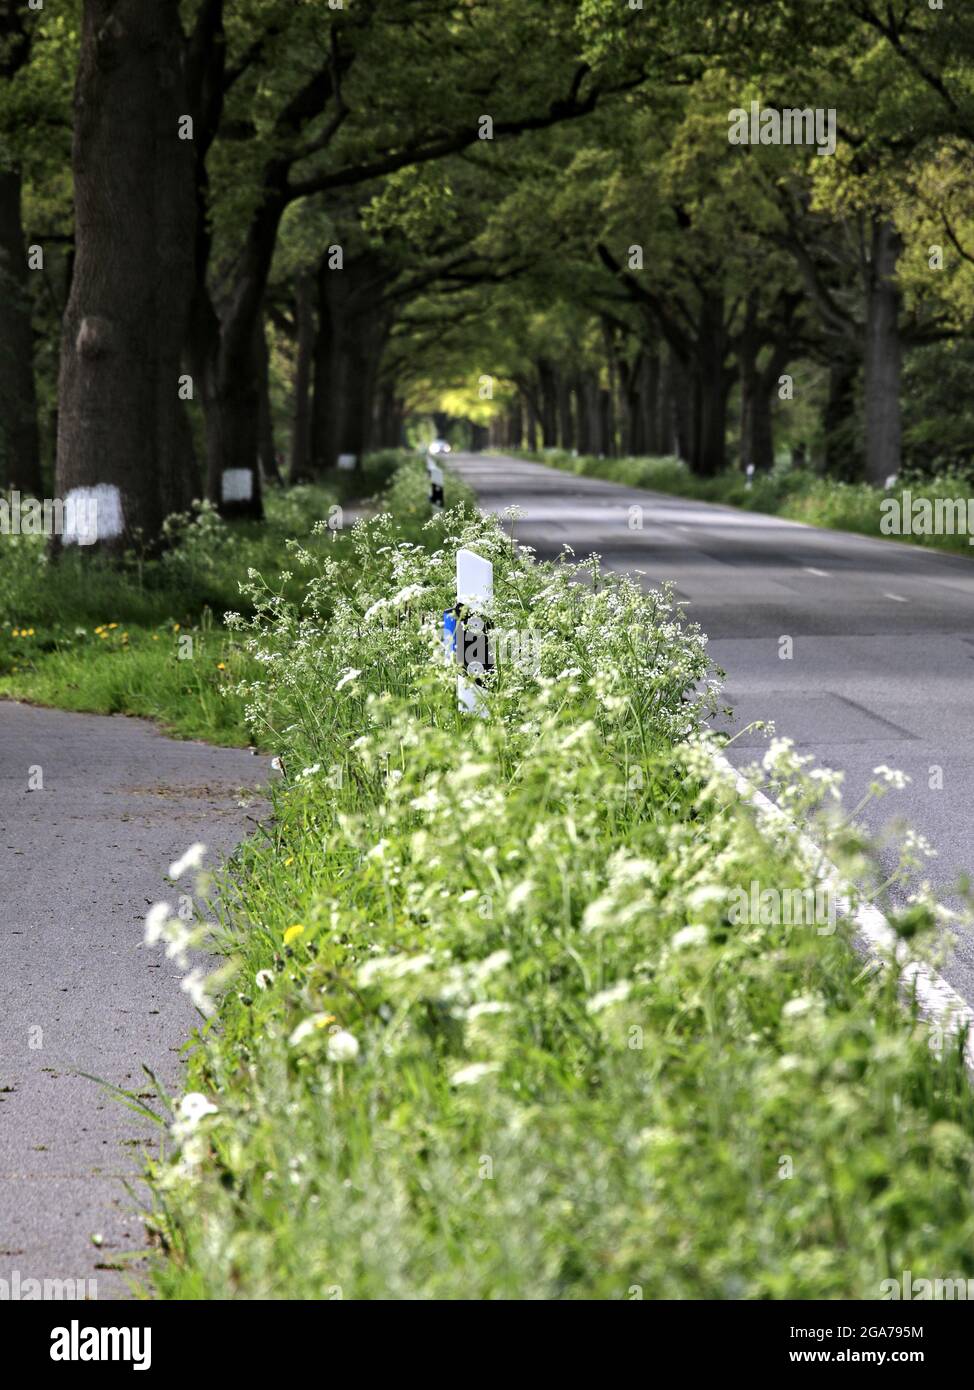 OSTERHOLZ SCHARMBECK, GERMANY - May 23, 2021: Road outside the village with trees, avenue, plants, overgrown green strips separate the bike path from Stock Photo